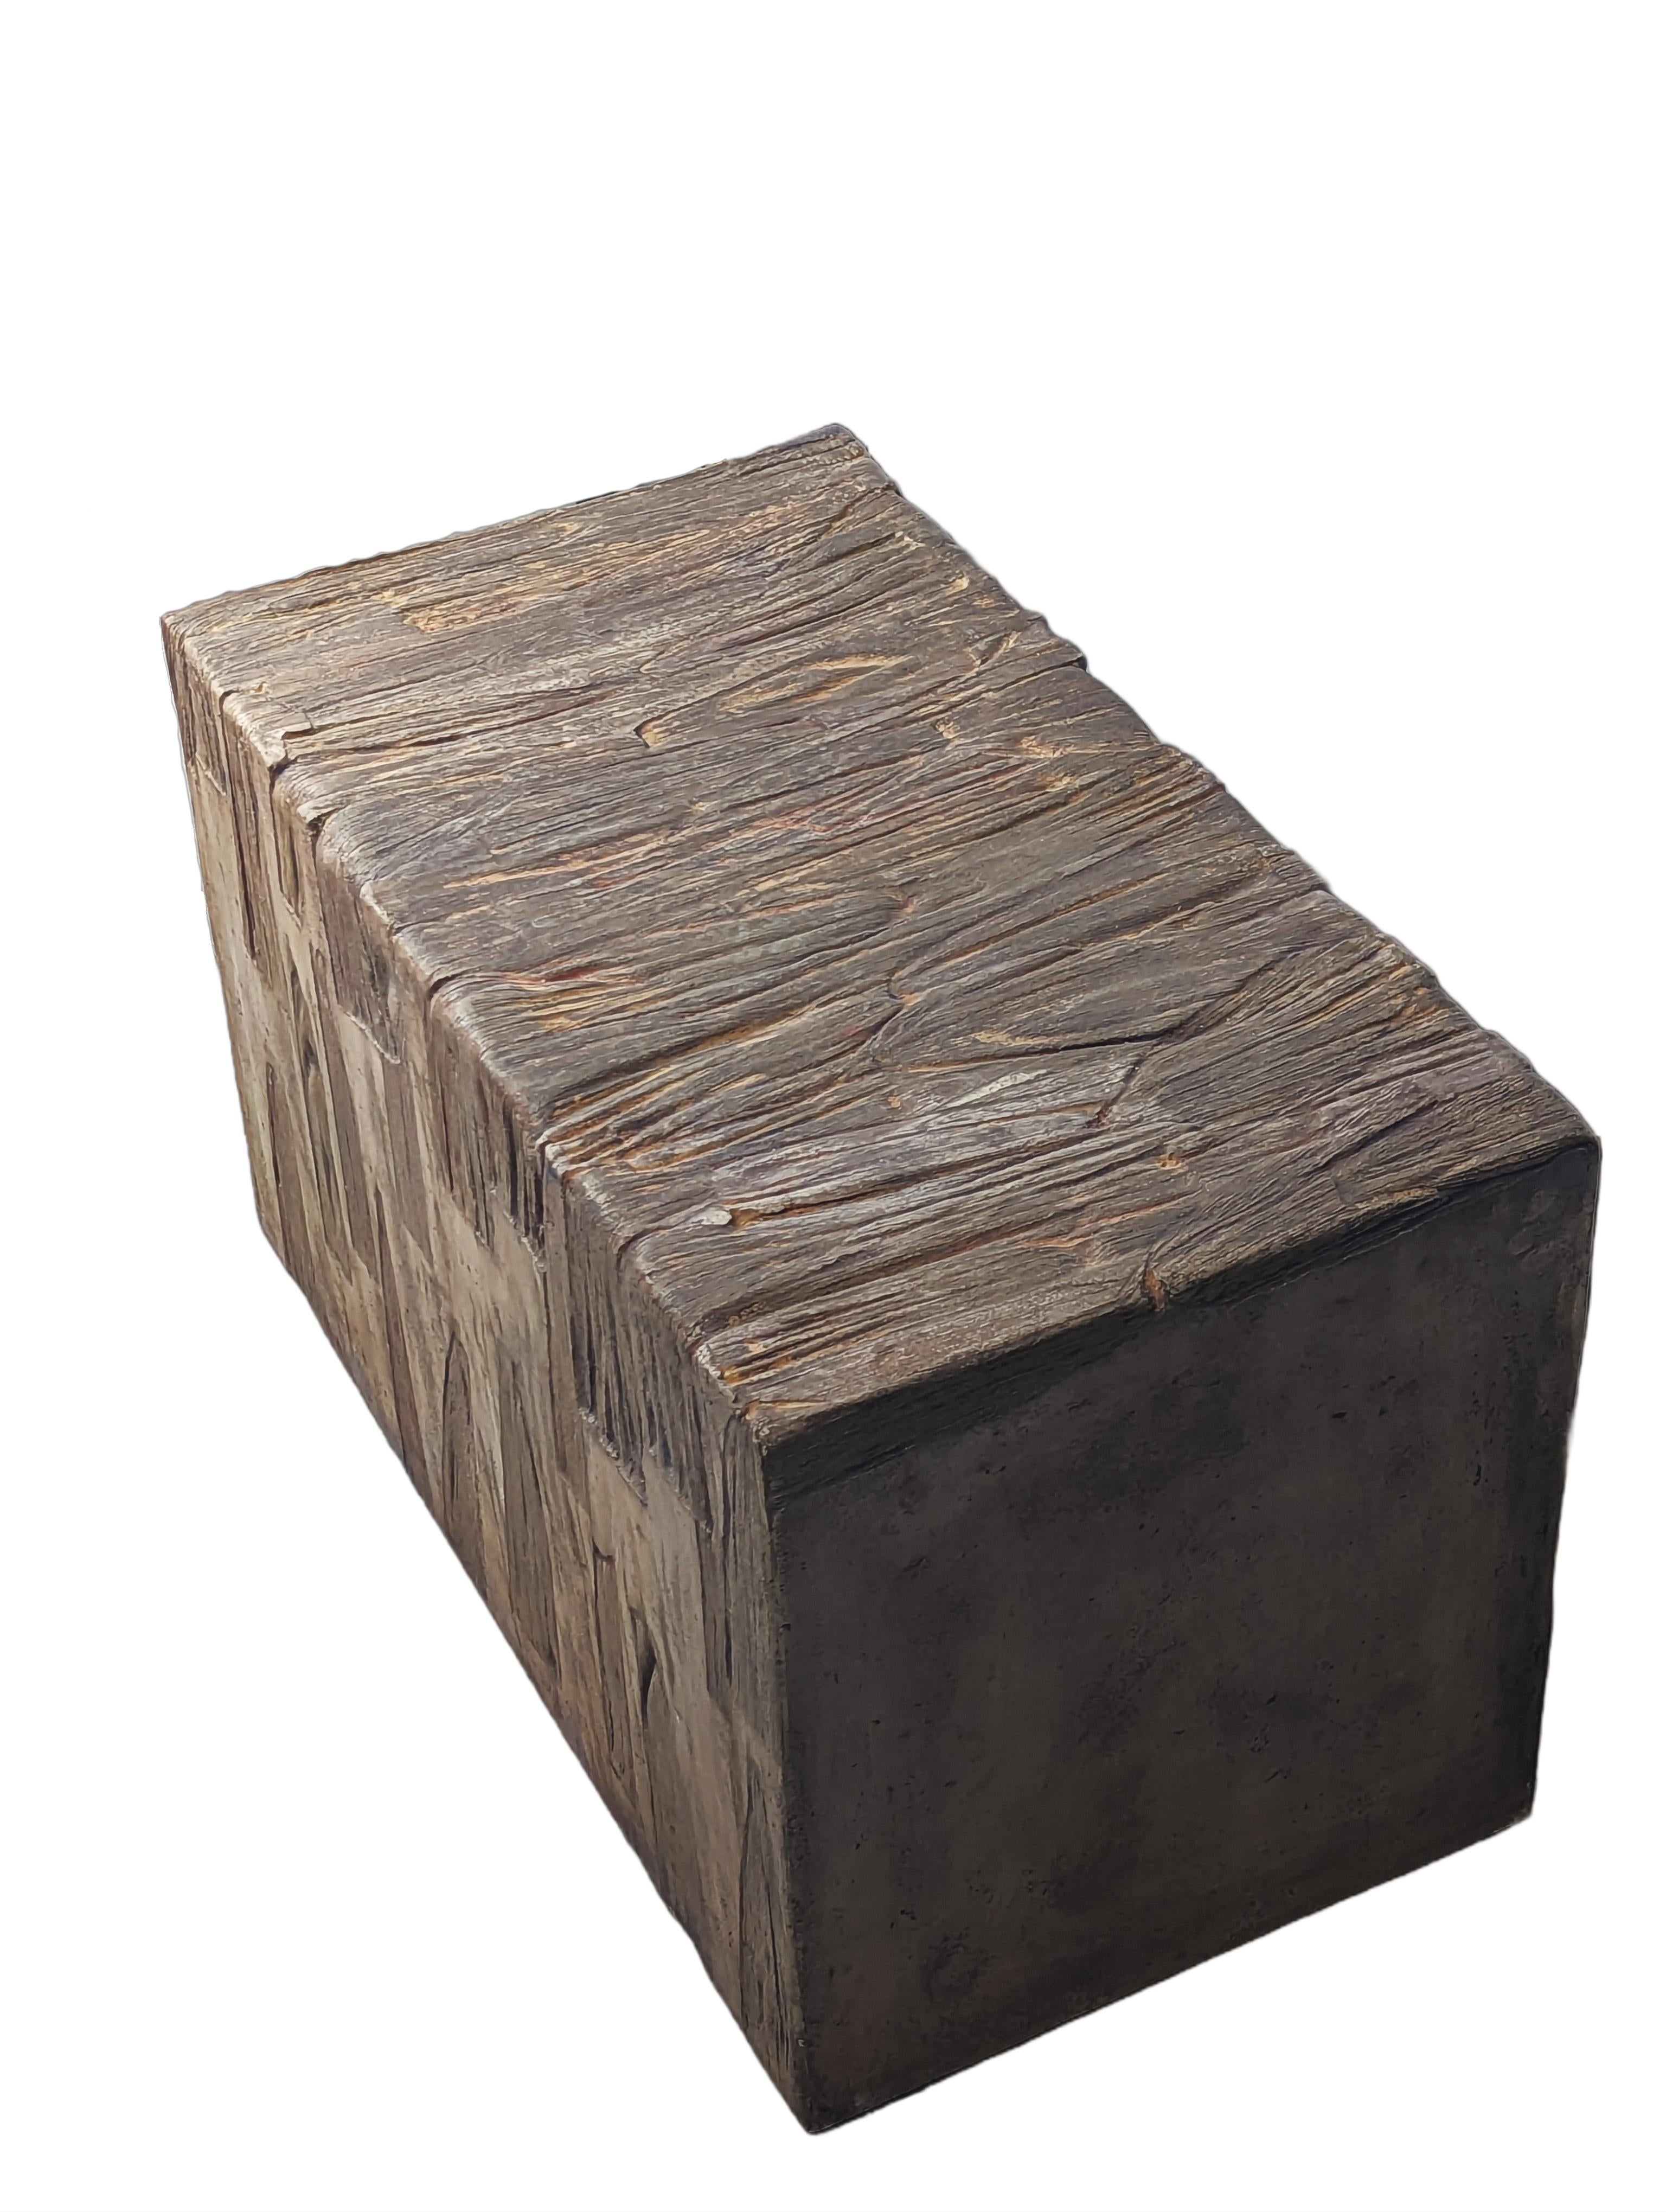 One of a kind, contemporary and rustic concrete bench or coffee table with dozens of corn husk impressions with brown, grey, copper, and blue tones. Organic texture is prominent but not rough, providing great visual and tactile interest. Would